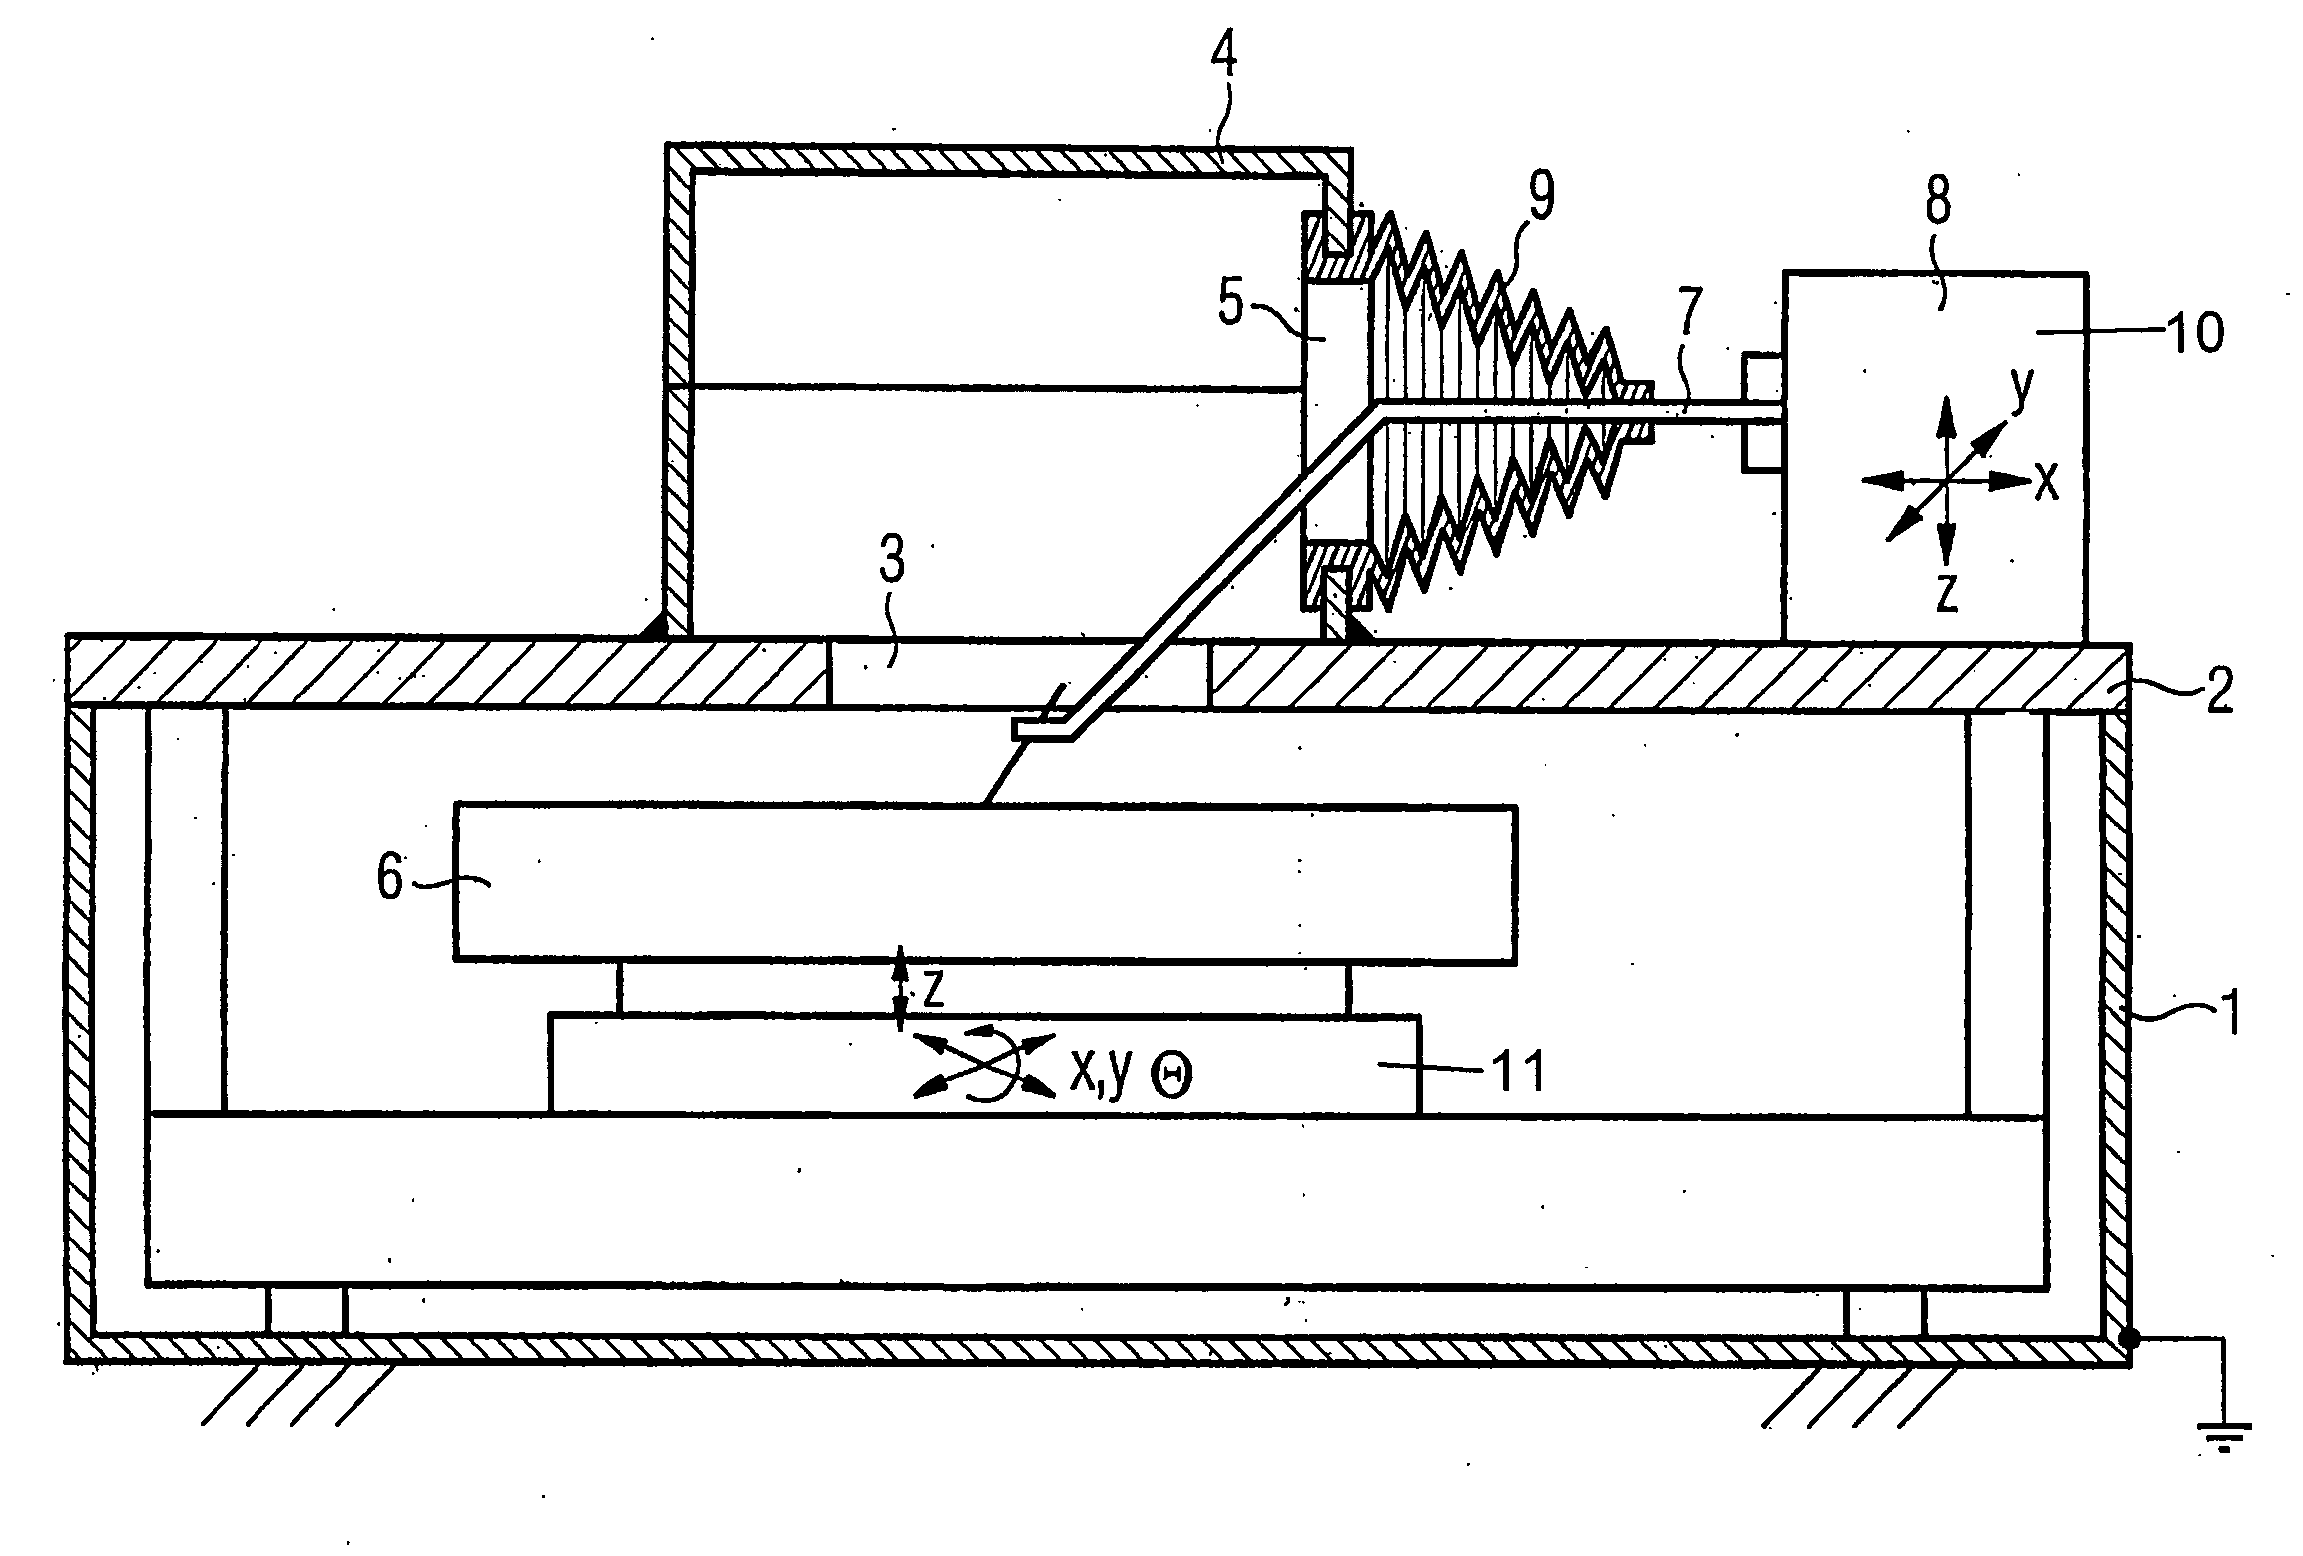 Probe station comprising a bellows with EMI shielding capabilities